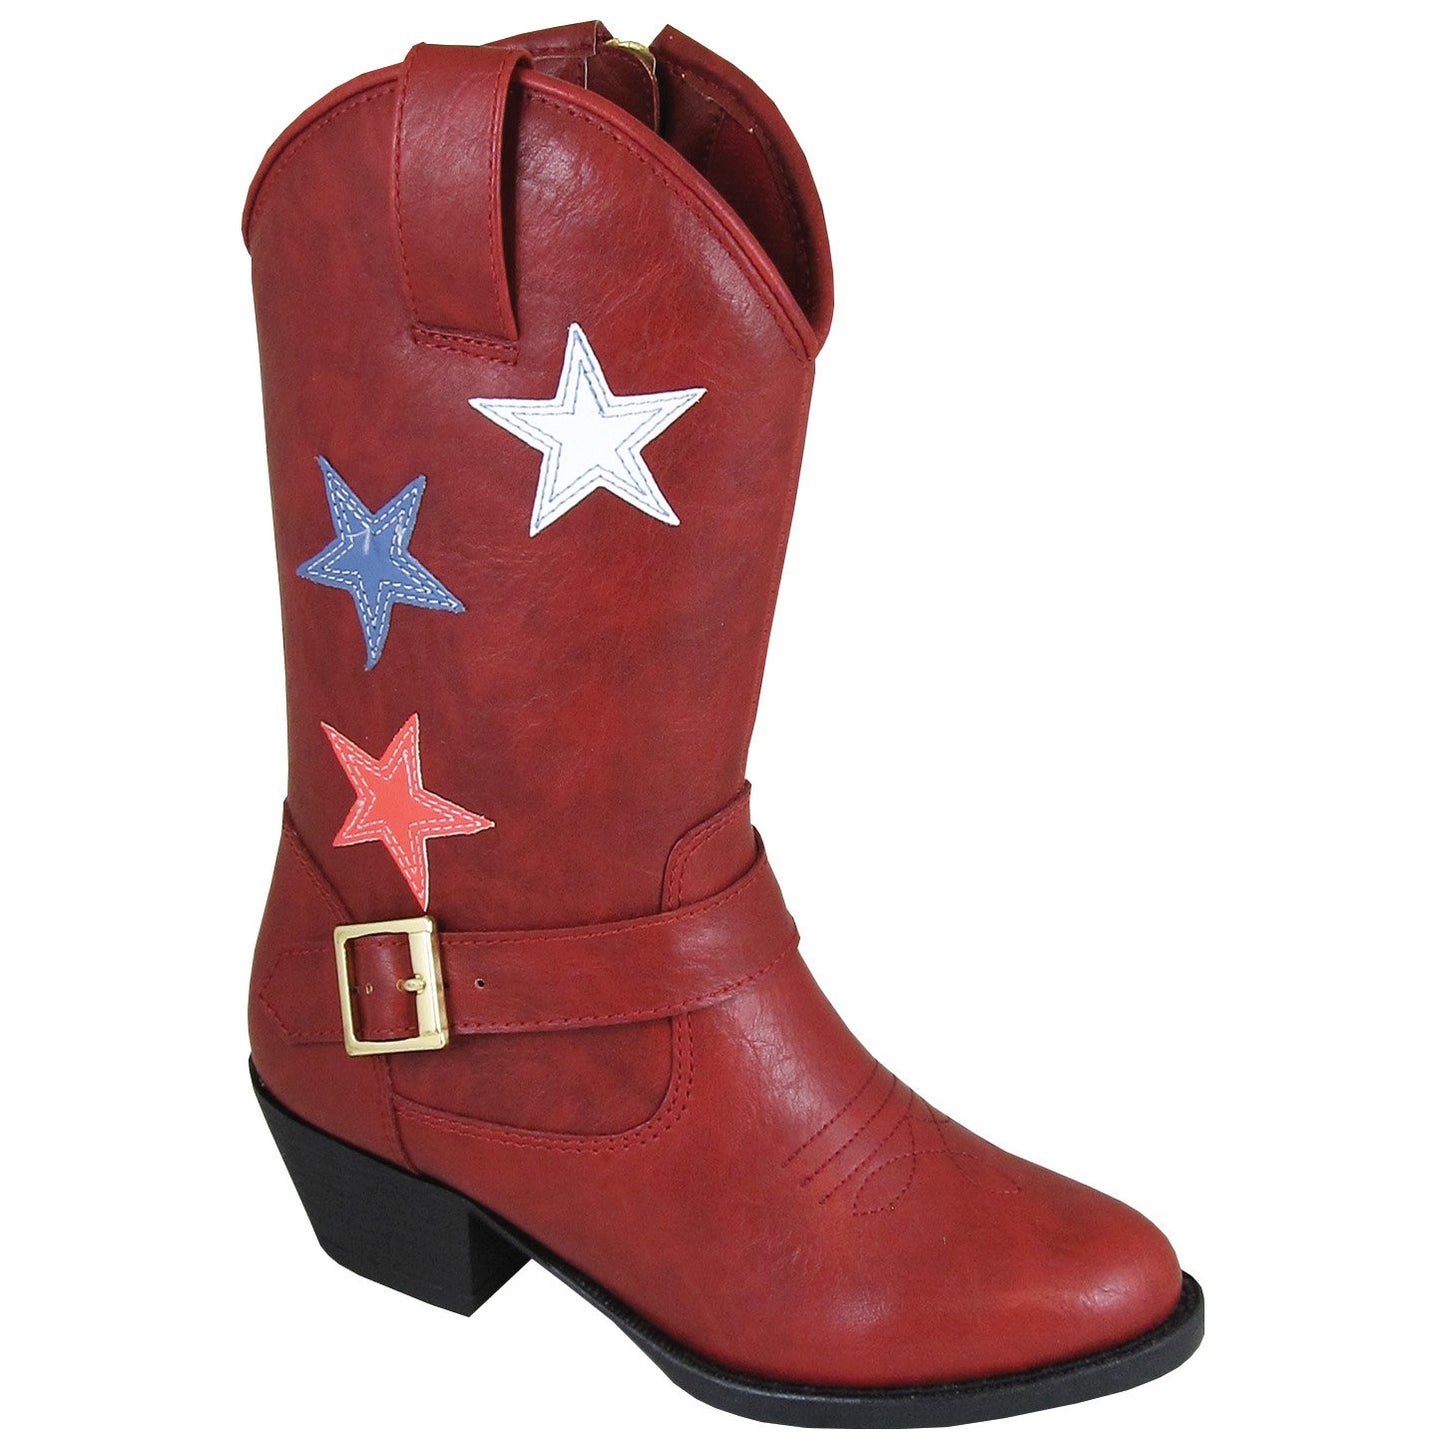 Smoky Mountain Girl's Children's Star Bright Red Cowboy Riding Boot